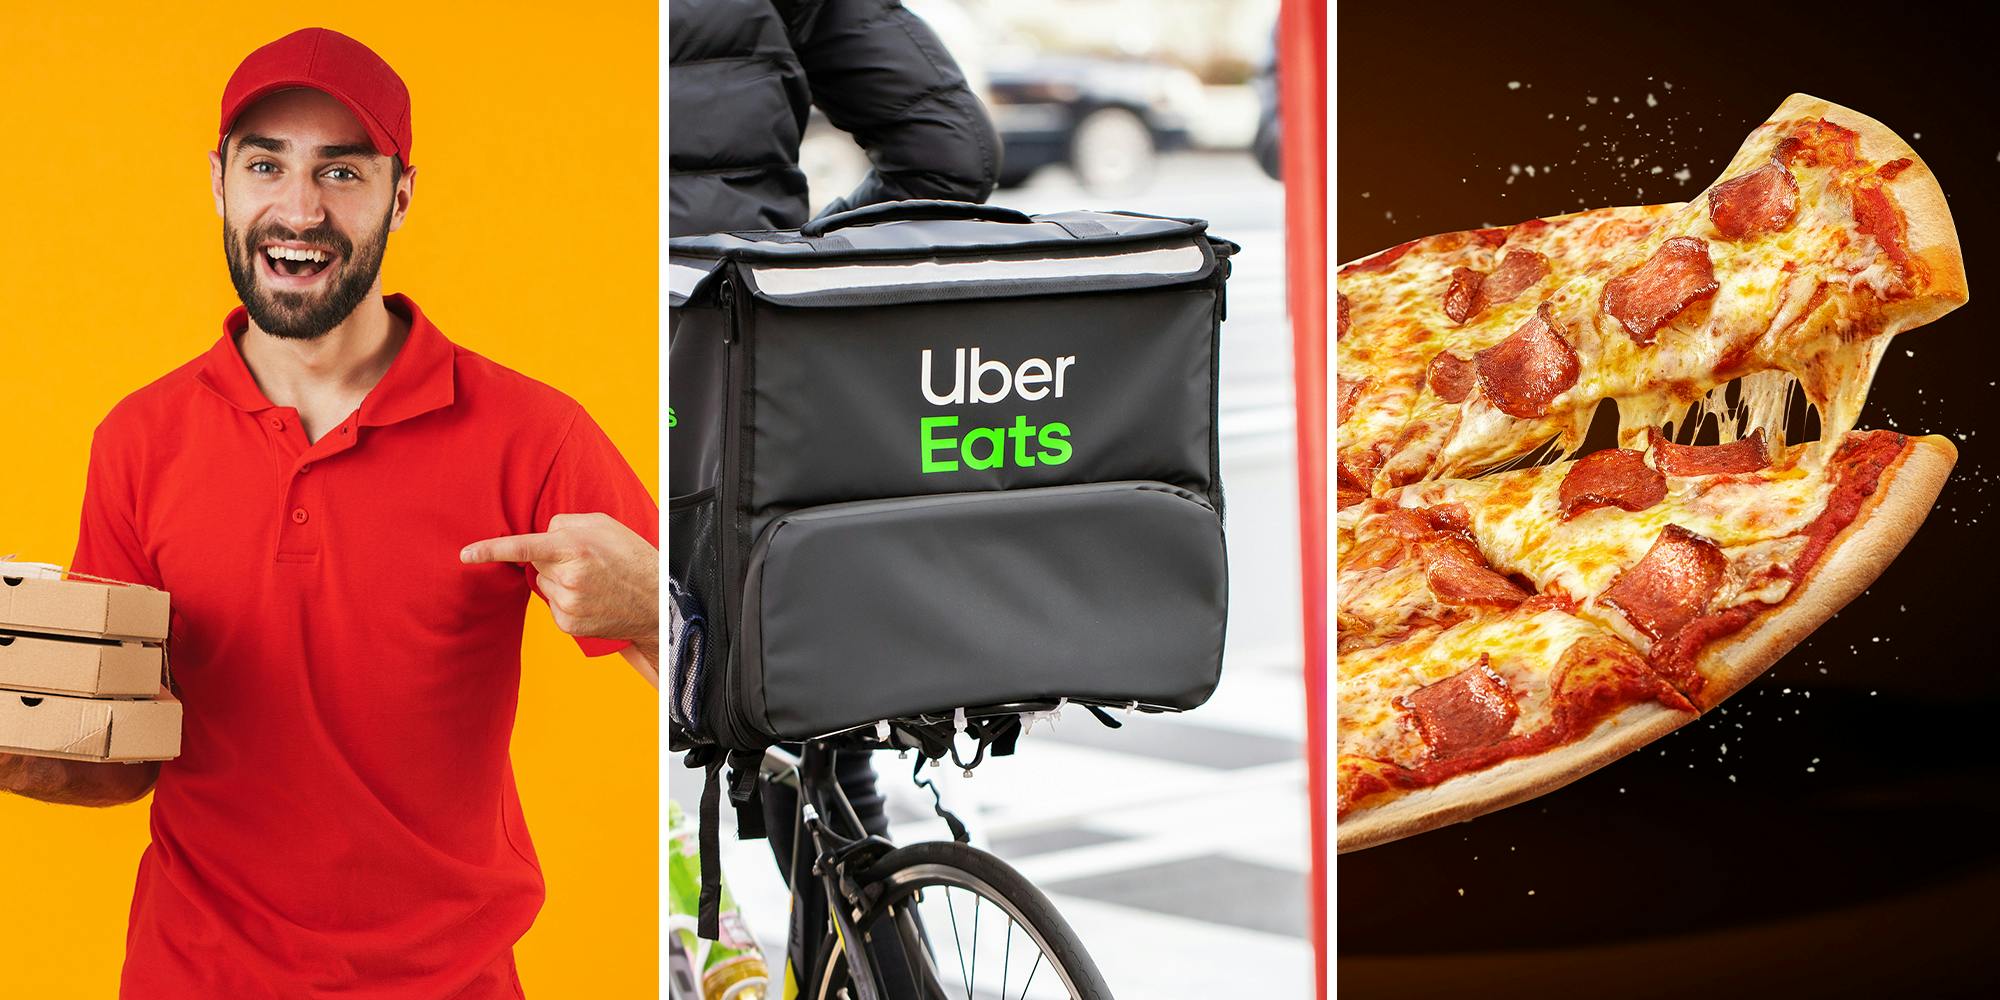 Uber Eats customer orders a pizza, can't believe what driver ends up delivering